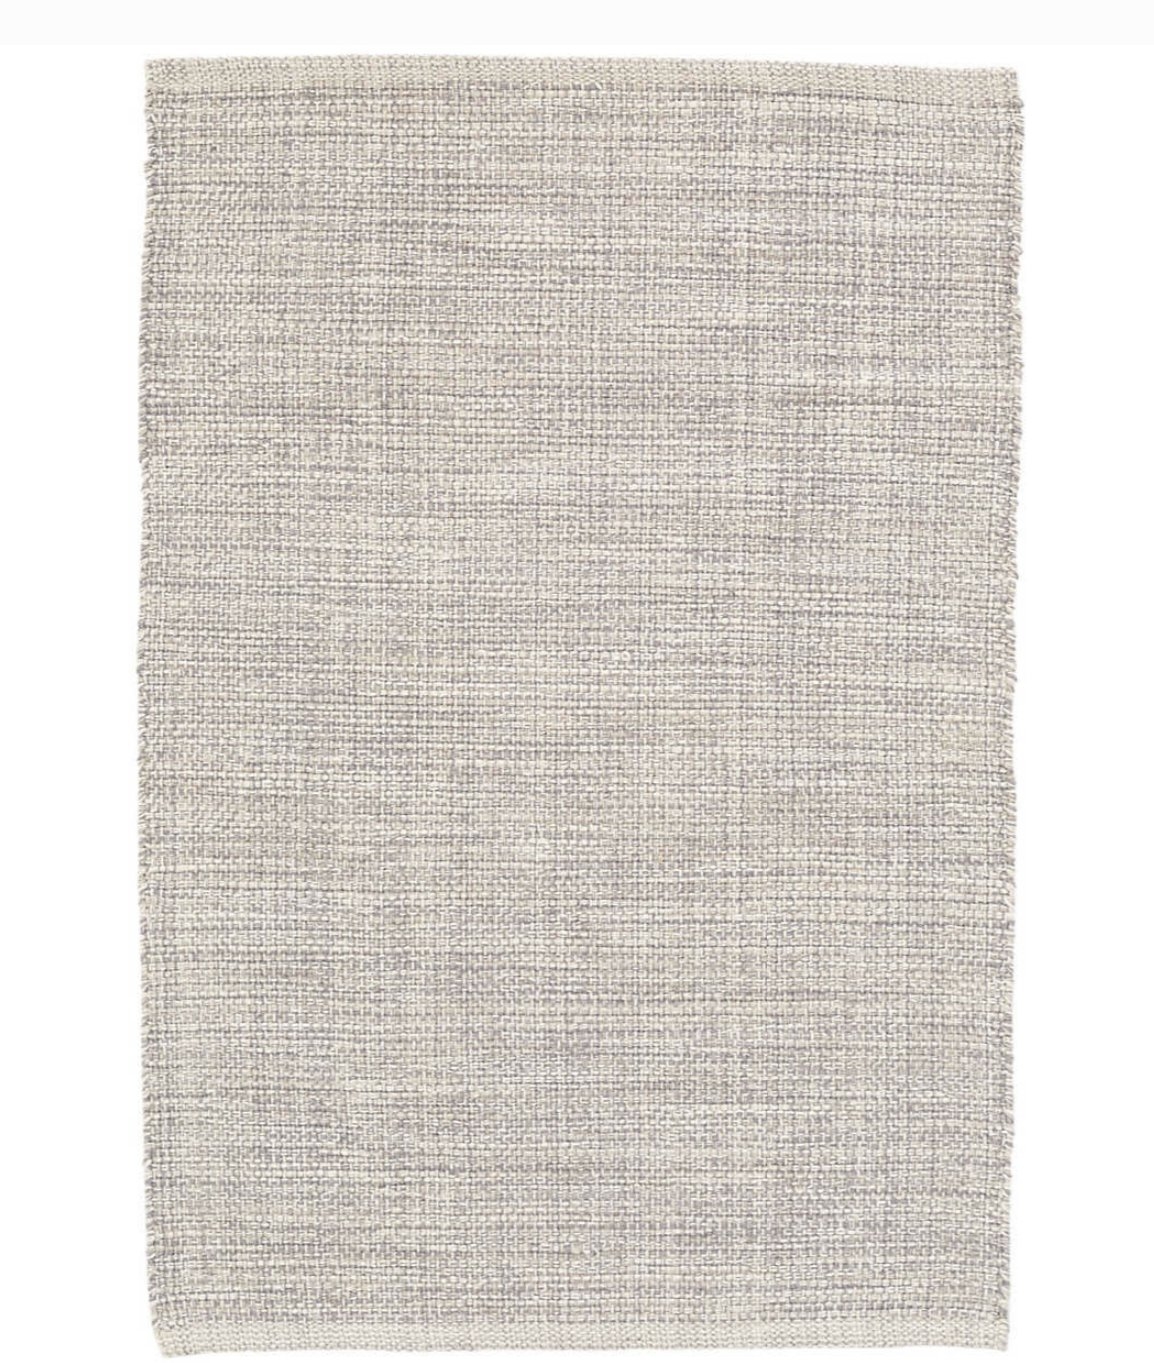 Marled Gray Woven Cotton Rug, 10' x 14' - Image 0